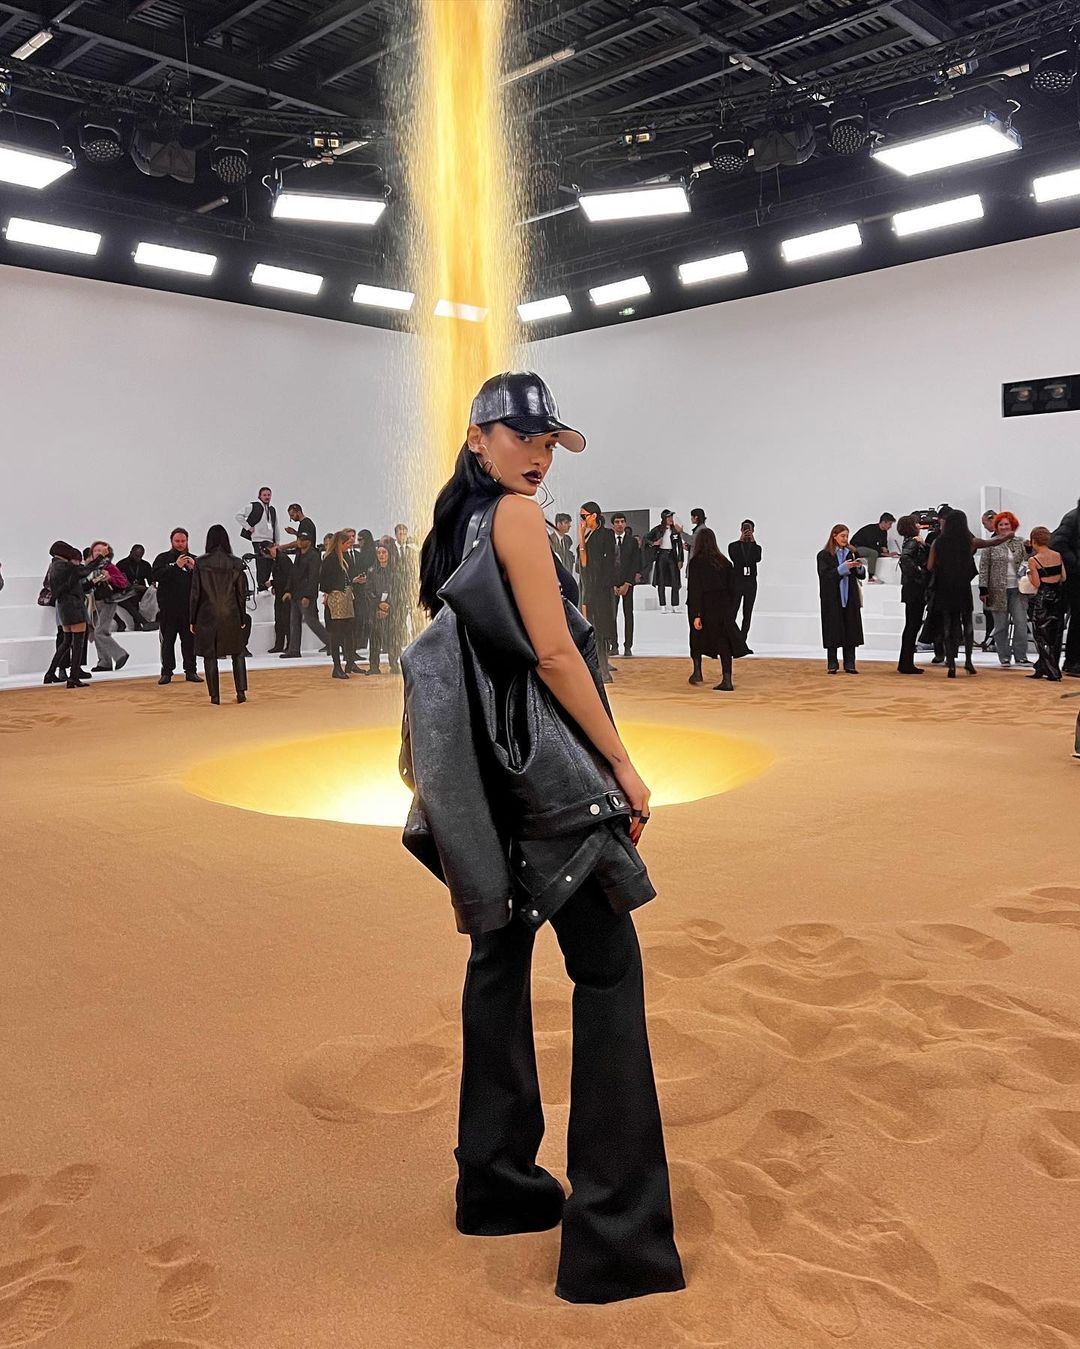 Paris Fashion Week 2022: Here are 9 Middle Eastern influencers who are ...